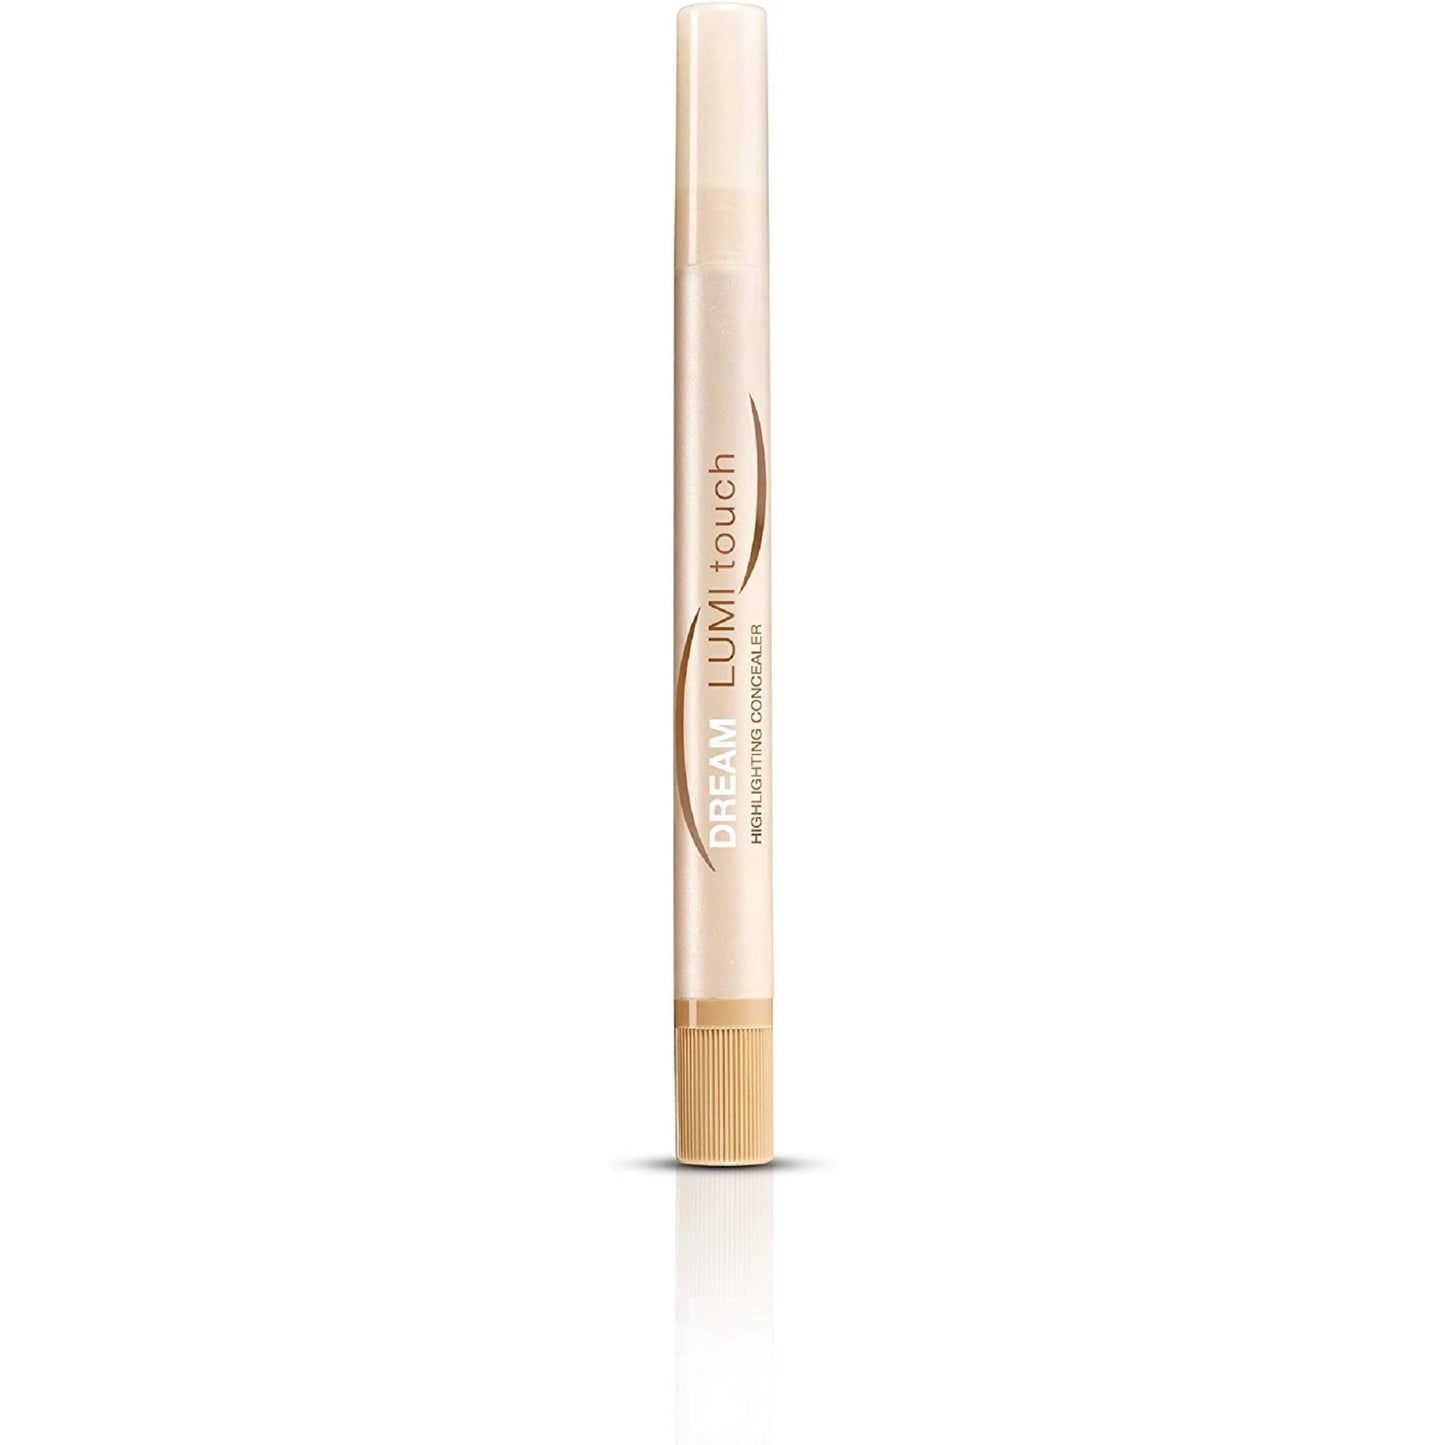 Maybelline New York Dream Lumi Touch Concealer - 01 Ivory-Maybelline-BeautyNmakeup.co.uk